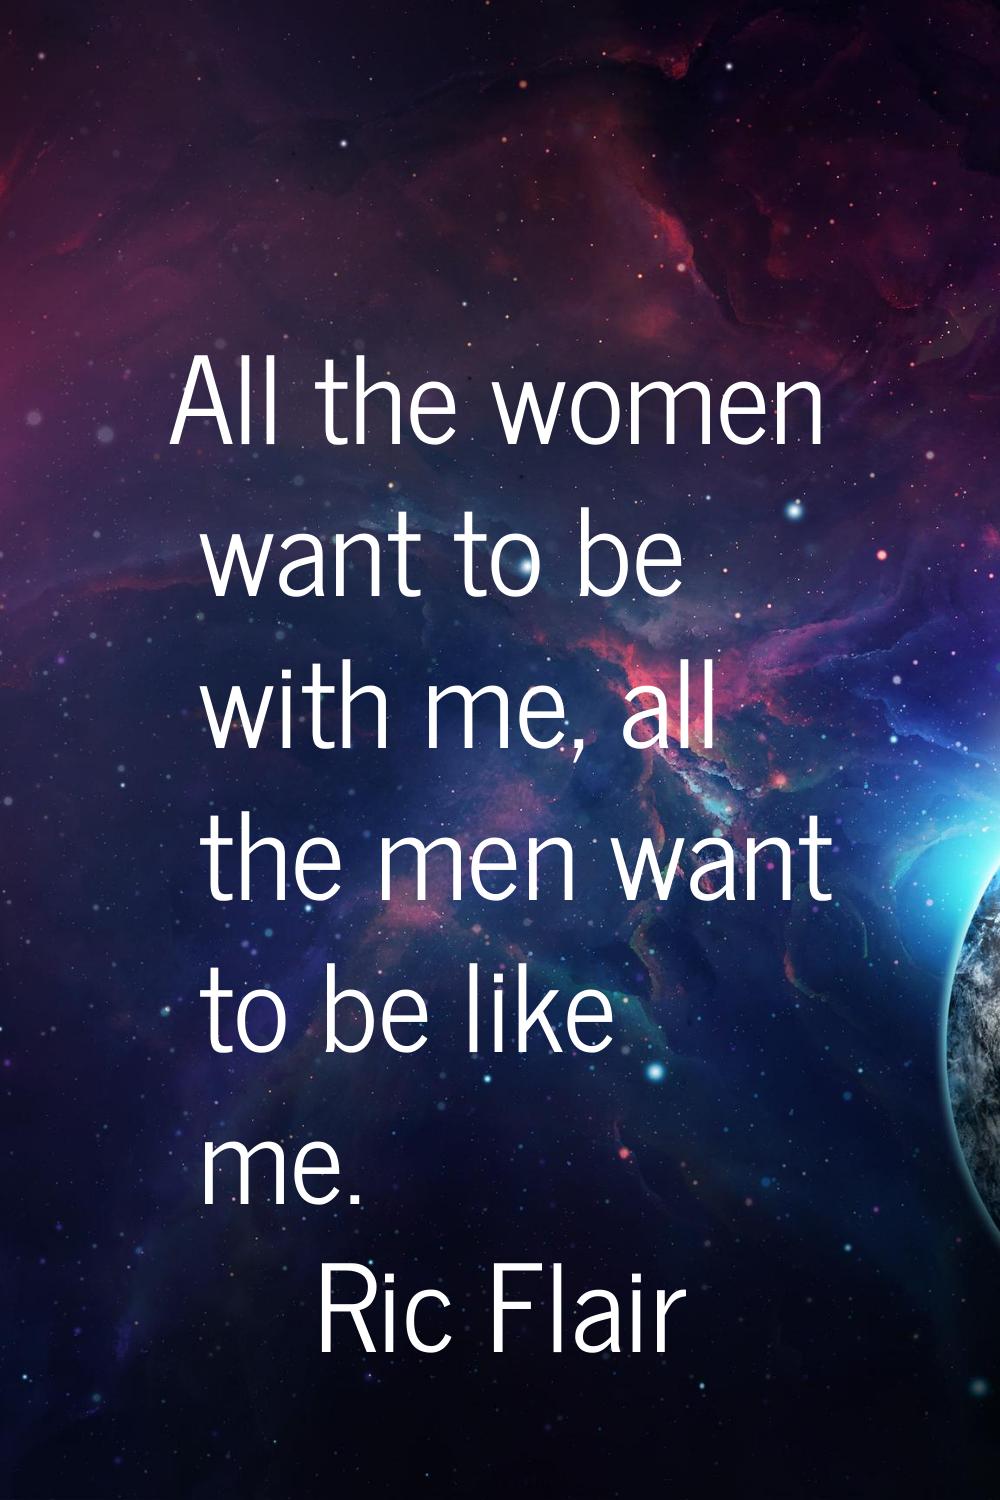 All the women want to be with me, all the men want to be like me.